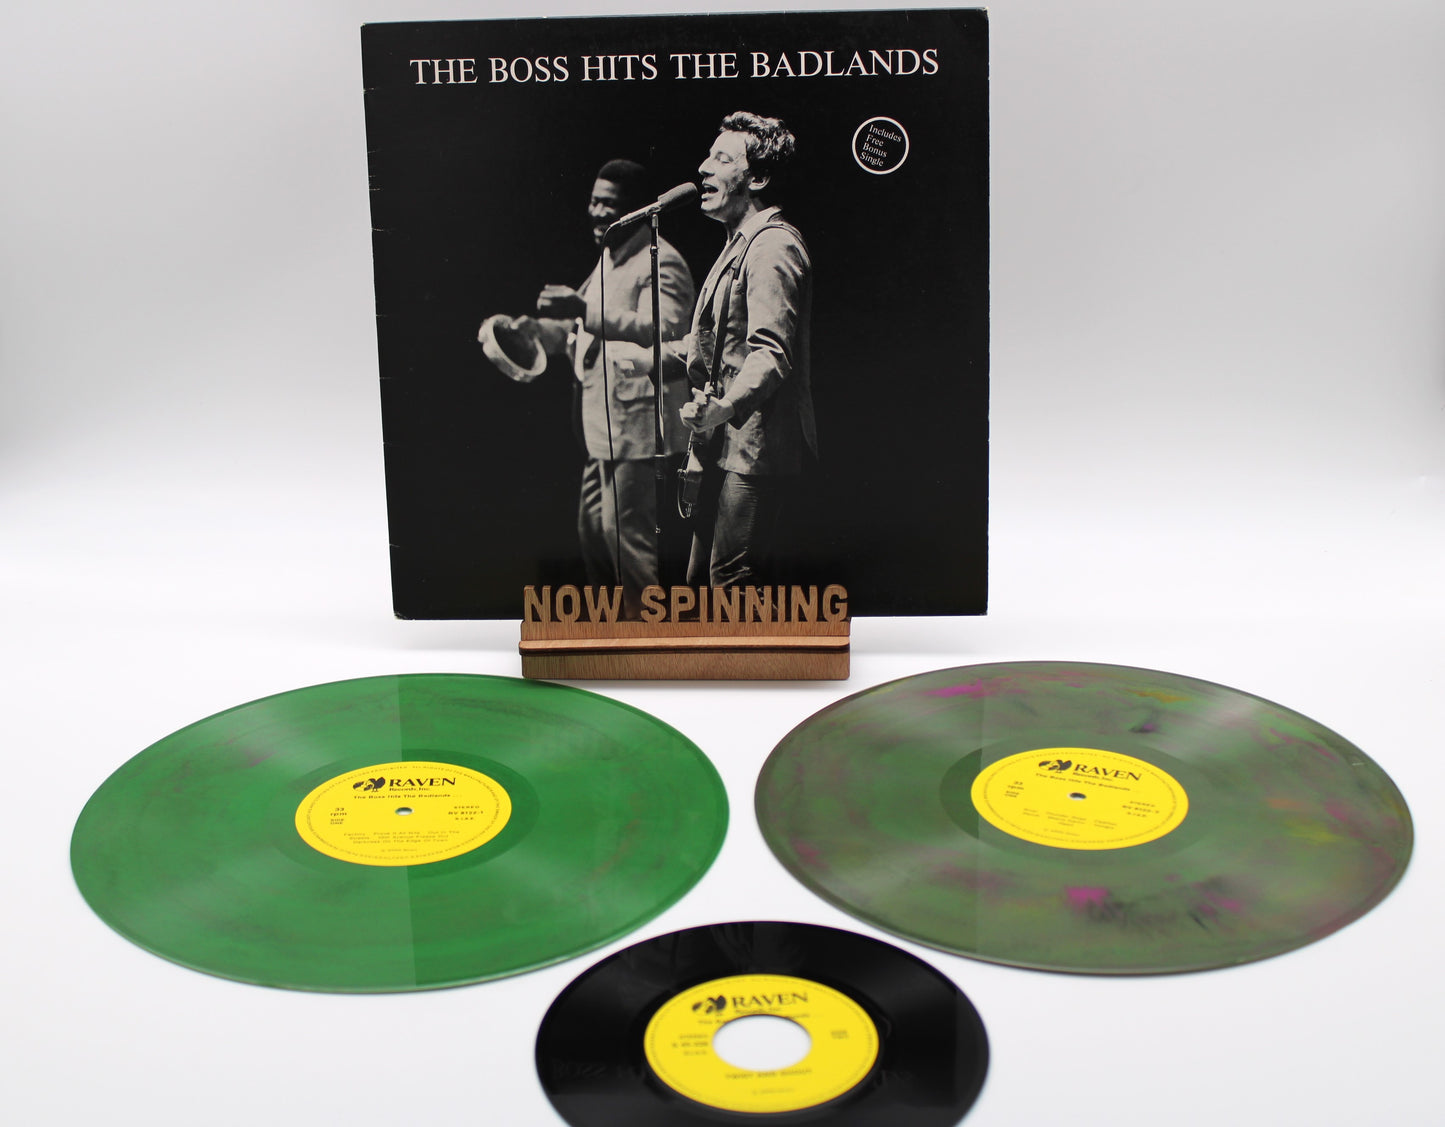 The Boss Hits The Badlands live in Frankfurt Festhalle, Germany Unofficial Vinyl Near Mint